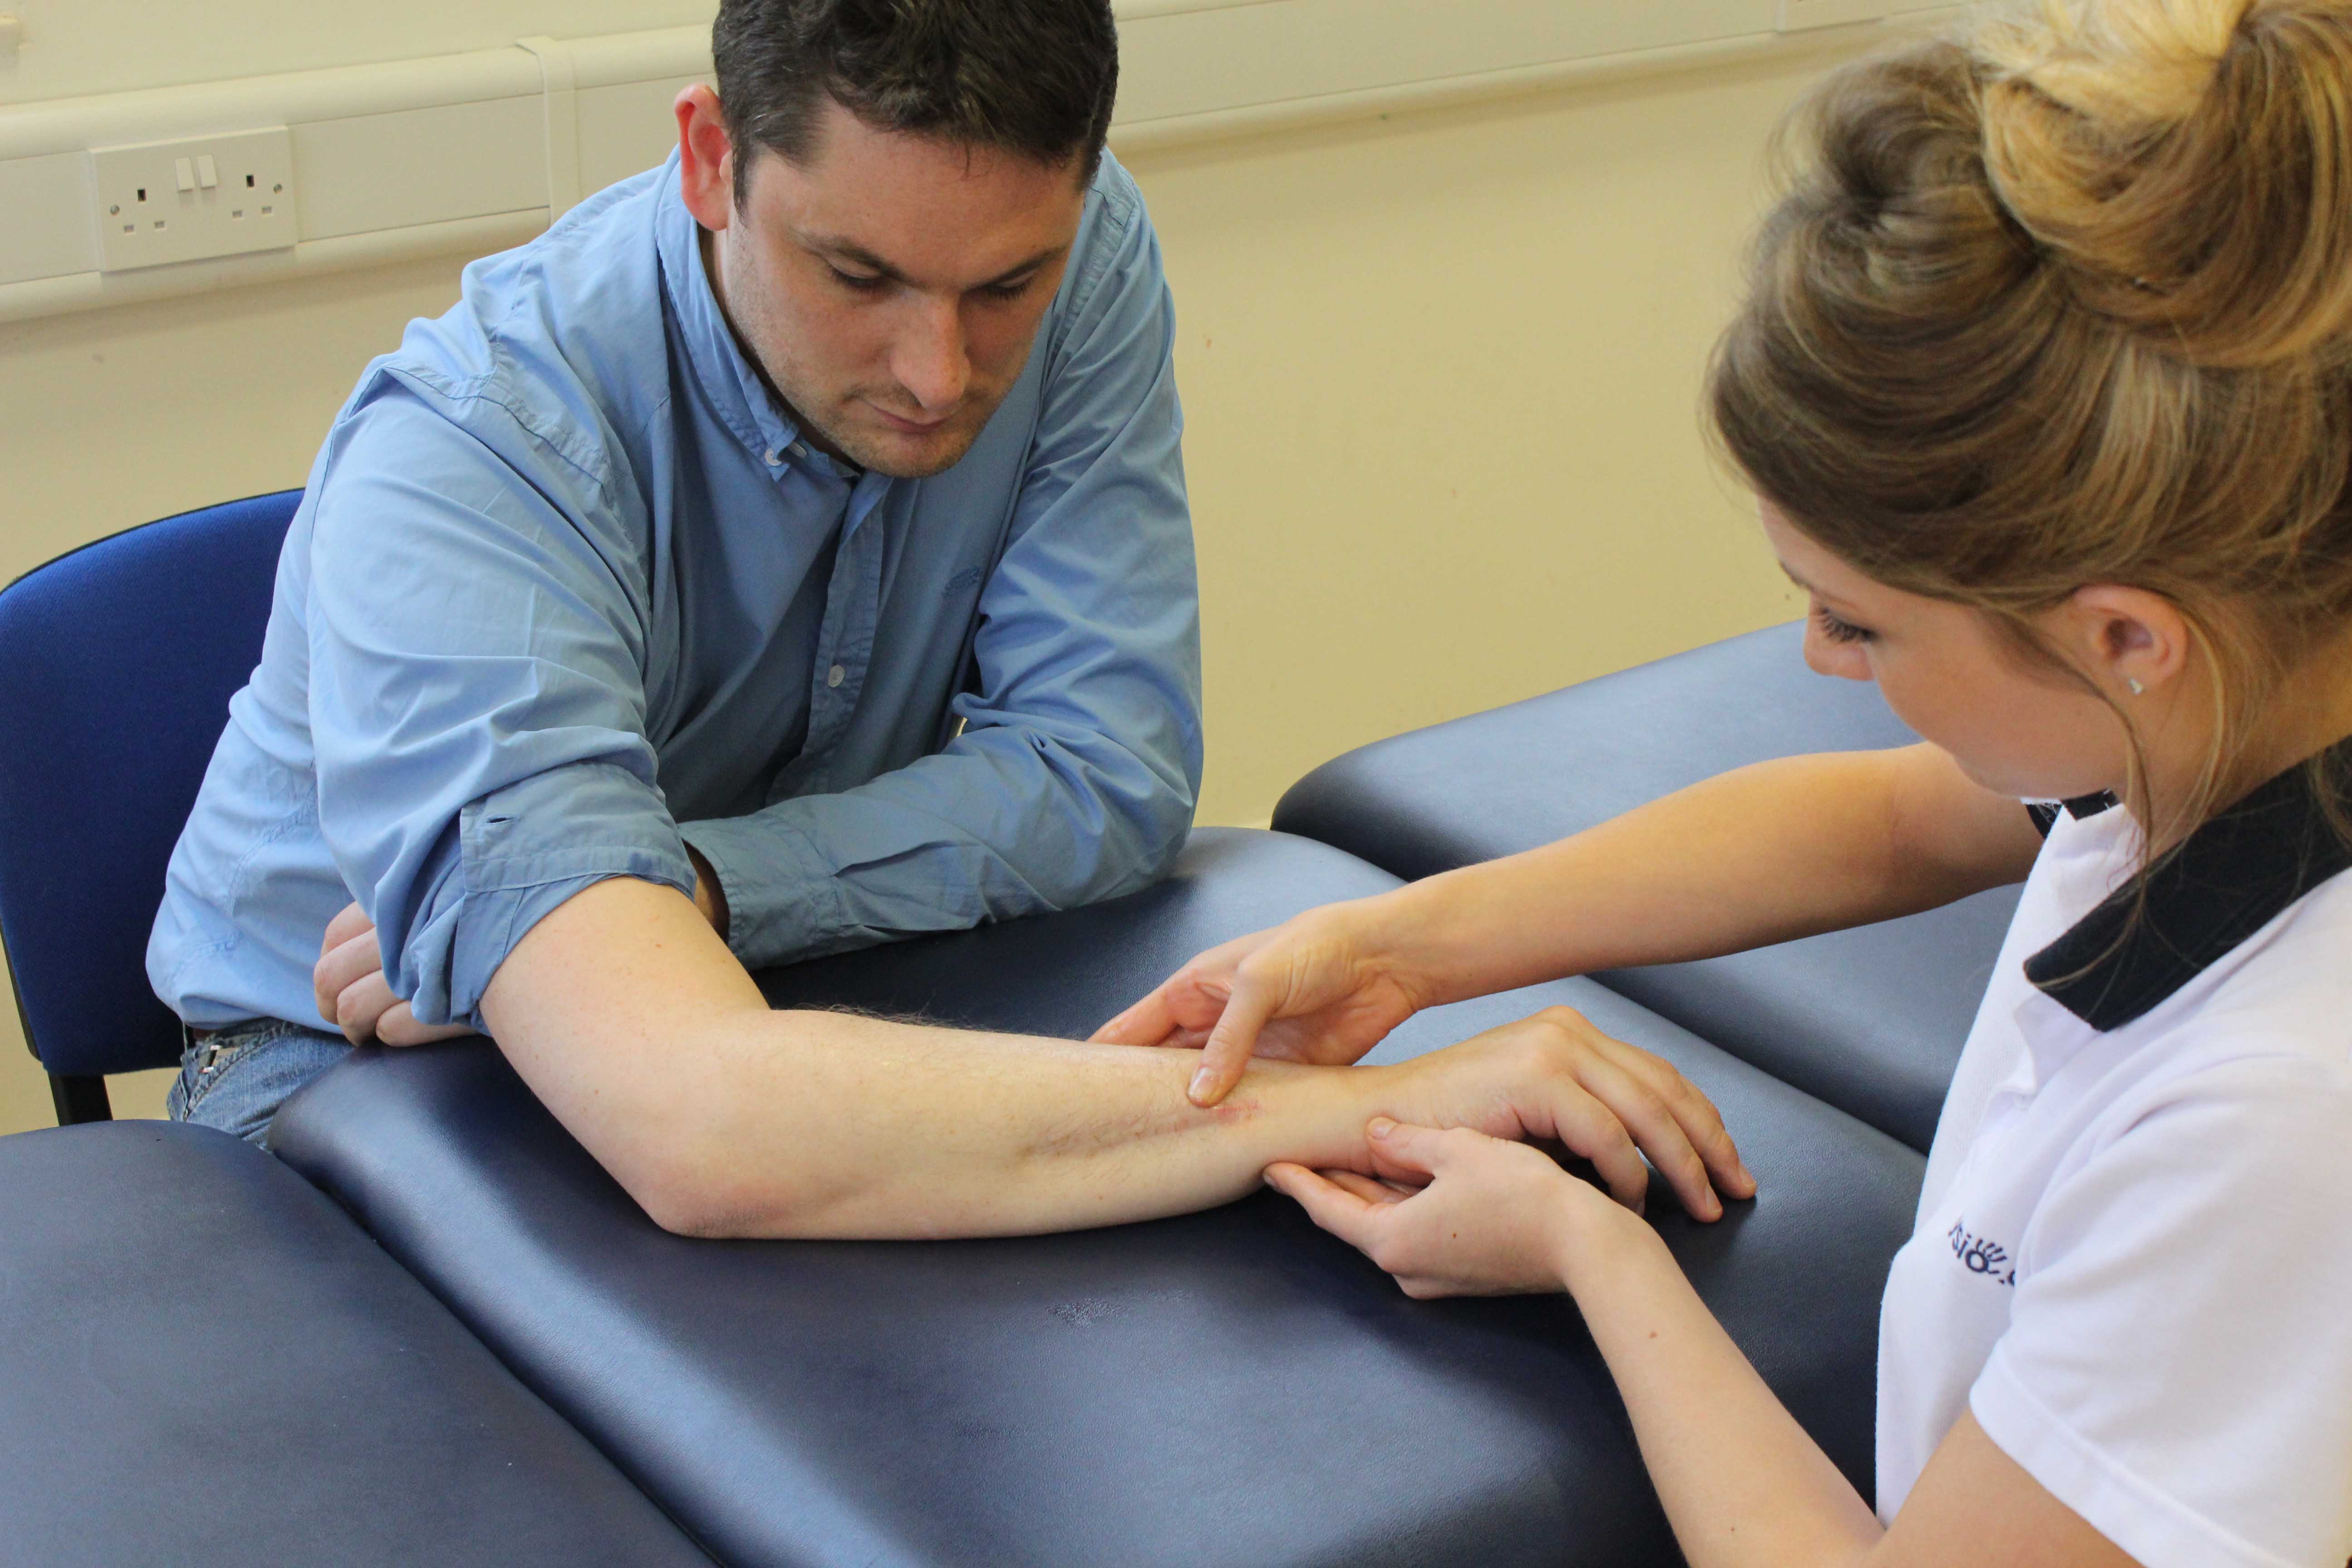 Following a fracture to the wrist, massage can help reduce stiffness and improve range of motion.